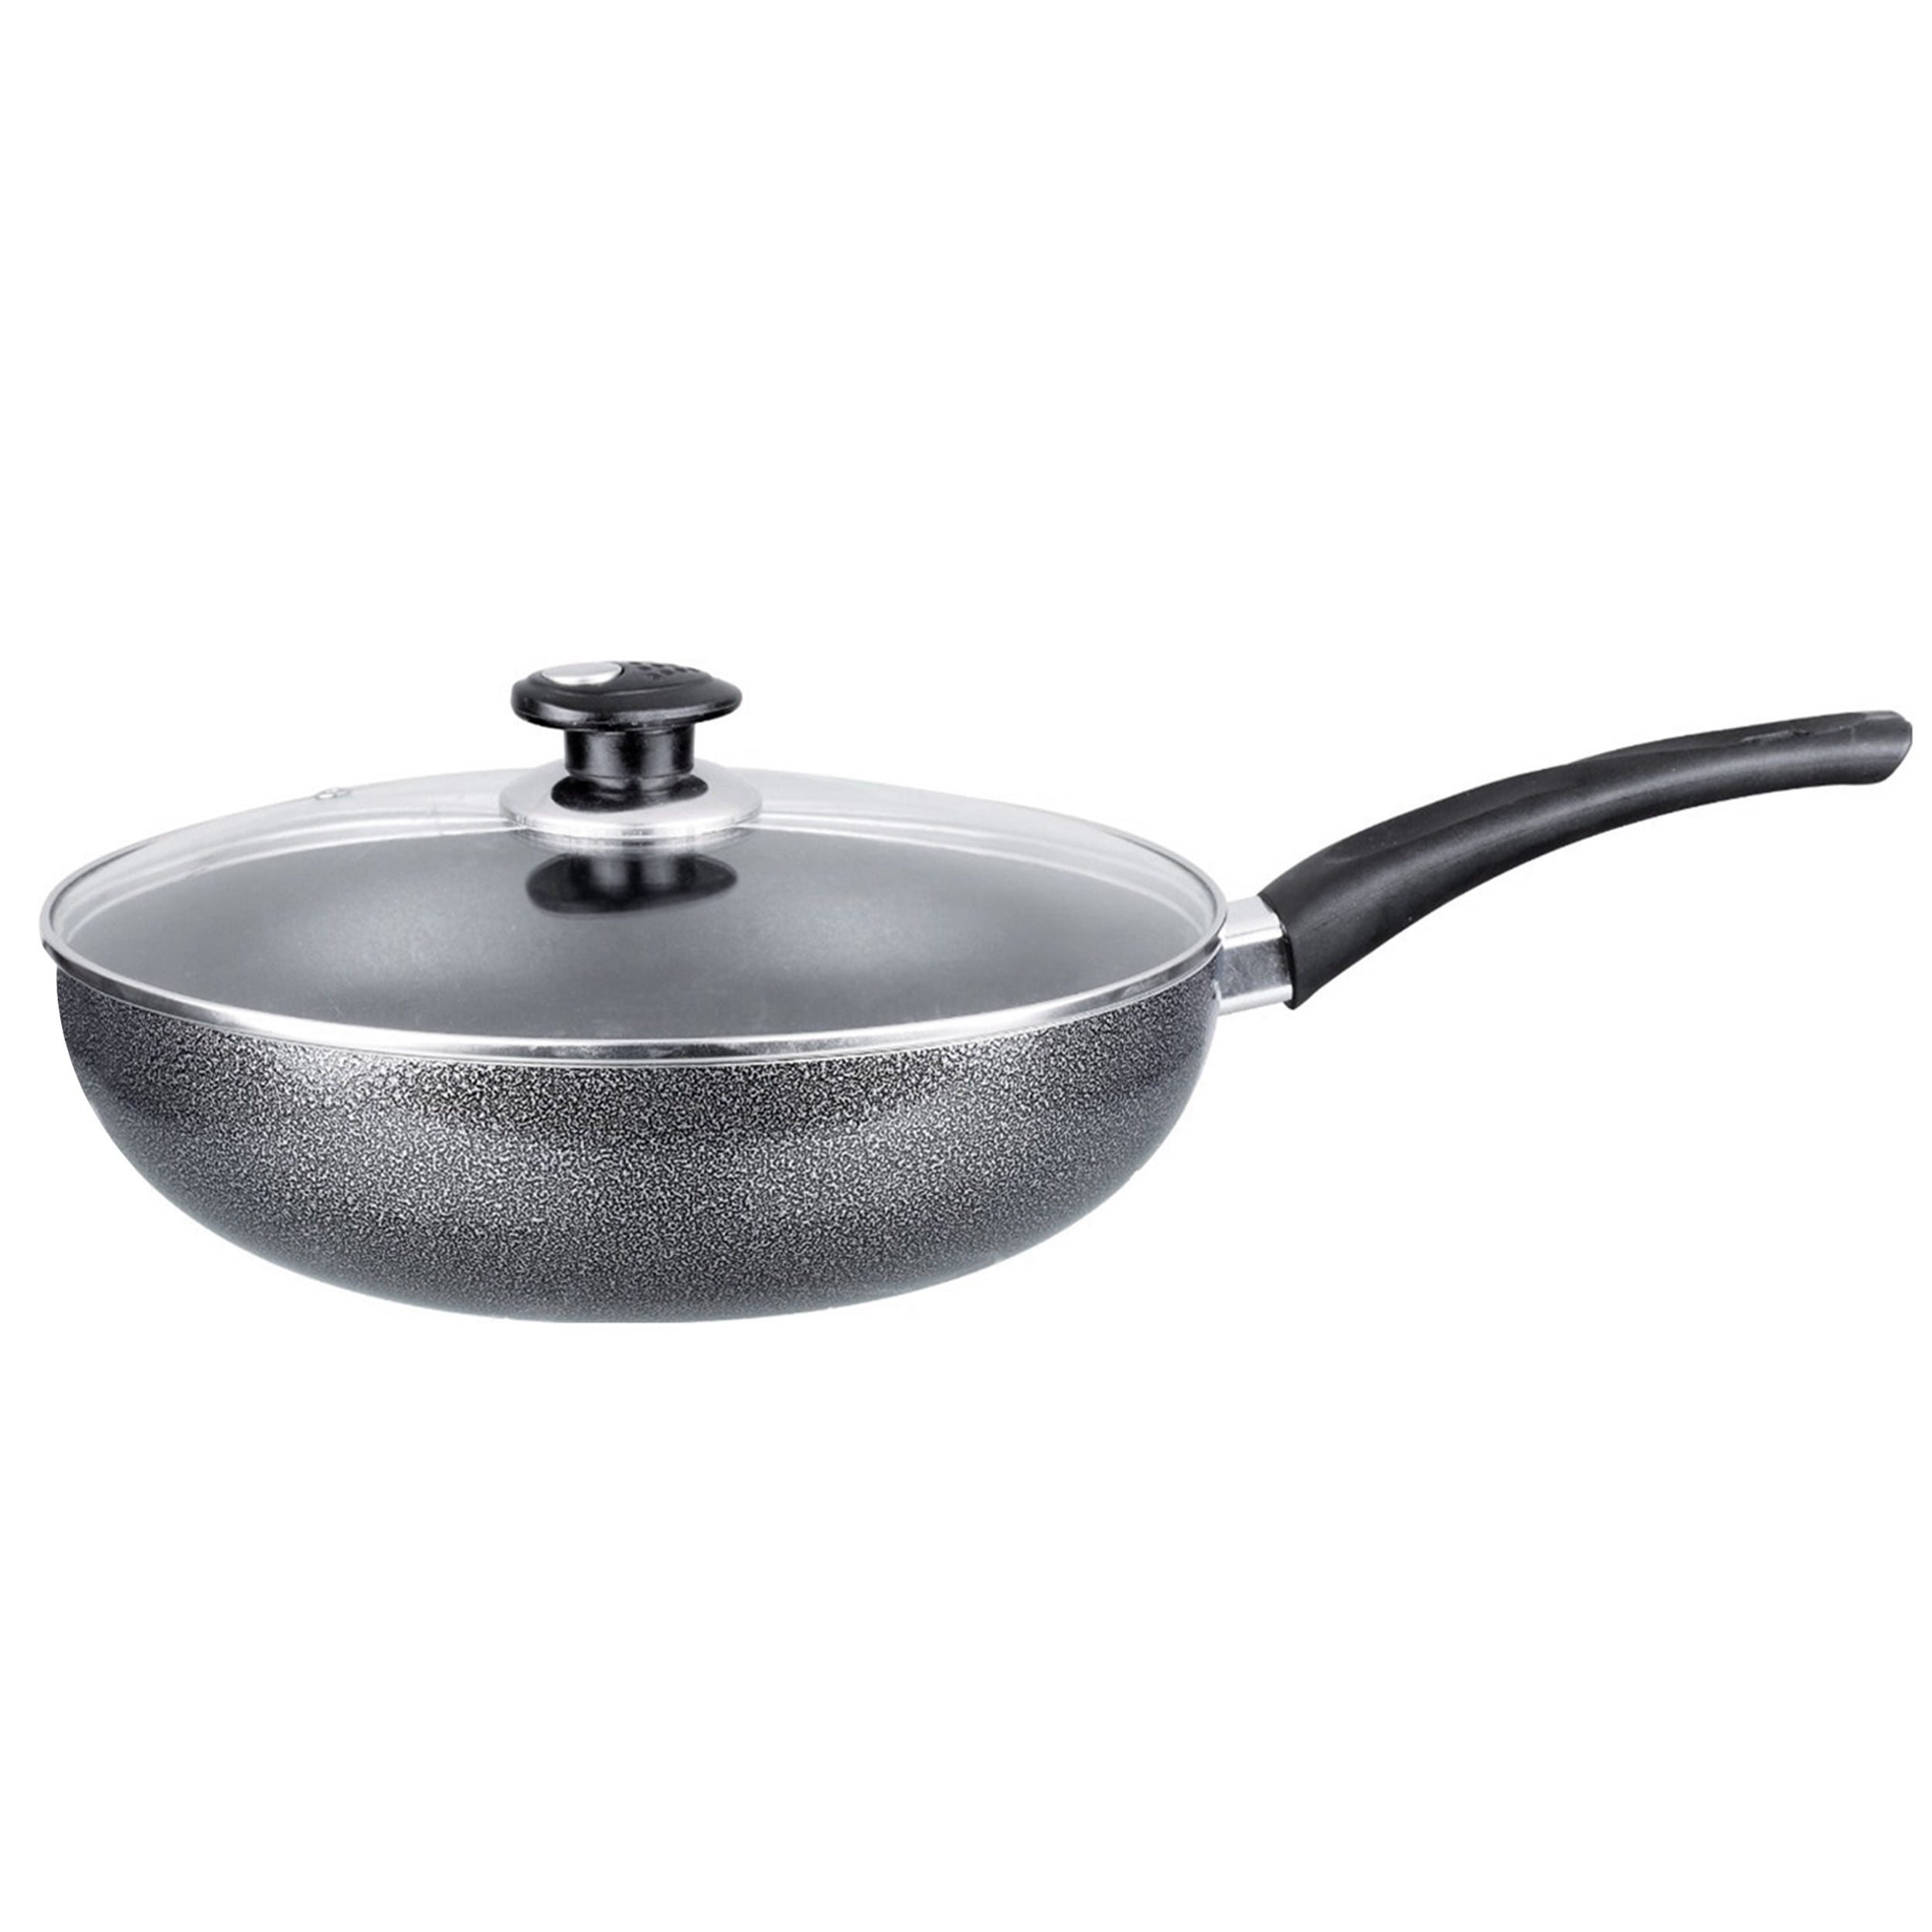 Copper Square XL Frying Pan 12 x 12 x 3.75 Inch Deep Induction Base Non Stick 